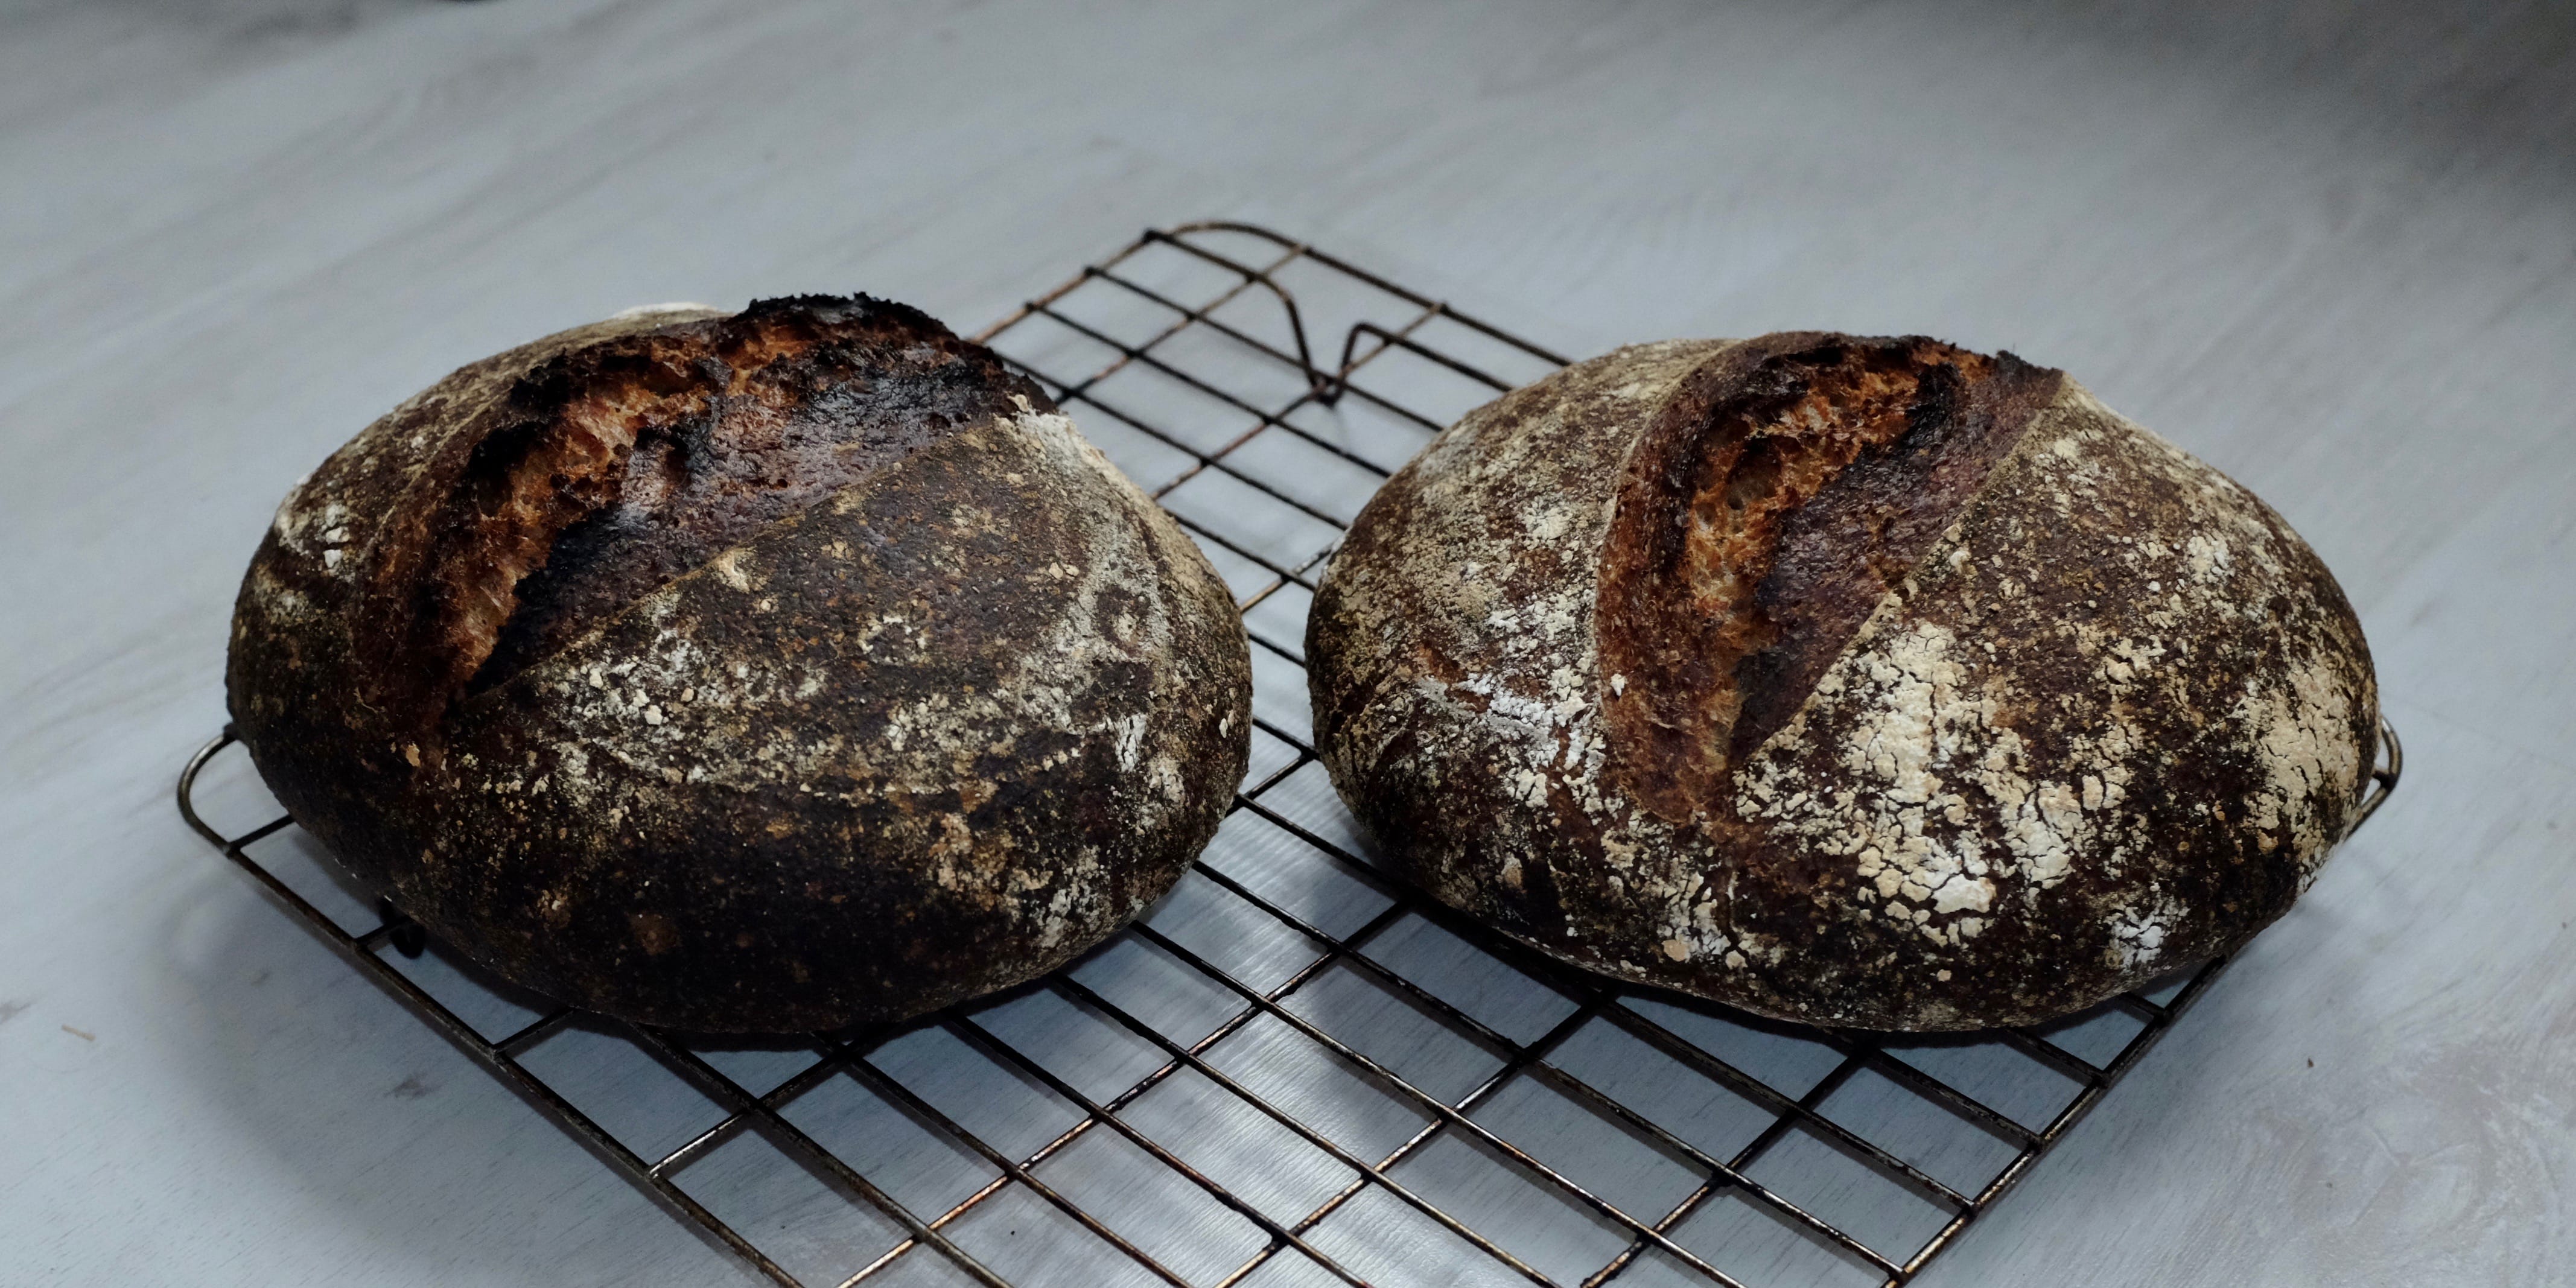 The crust of two breads